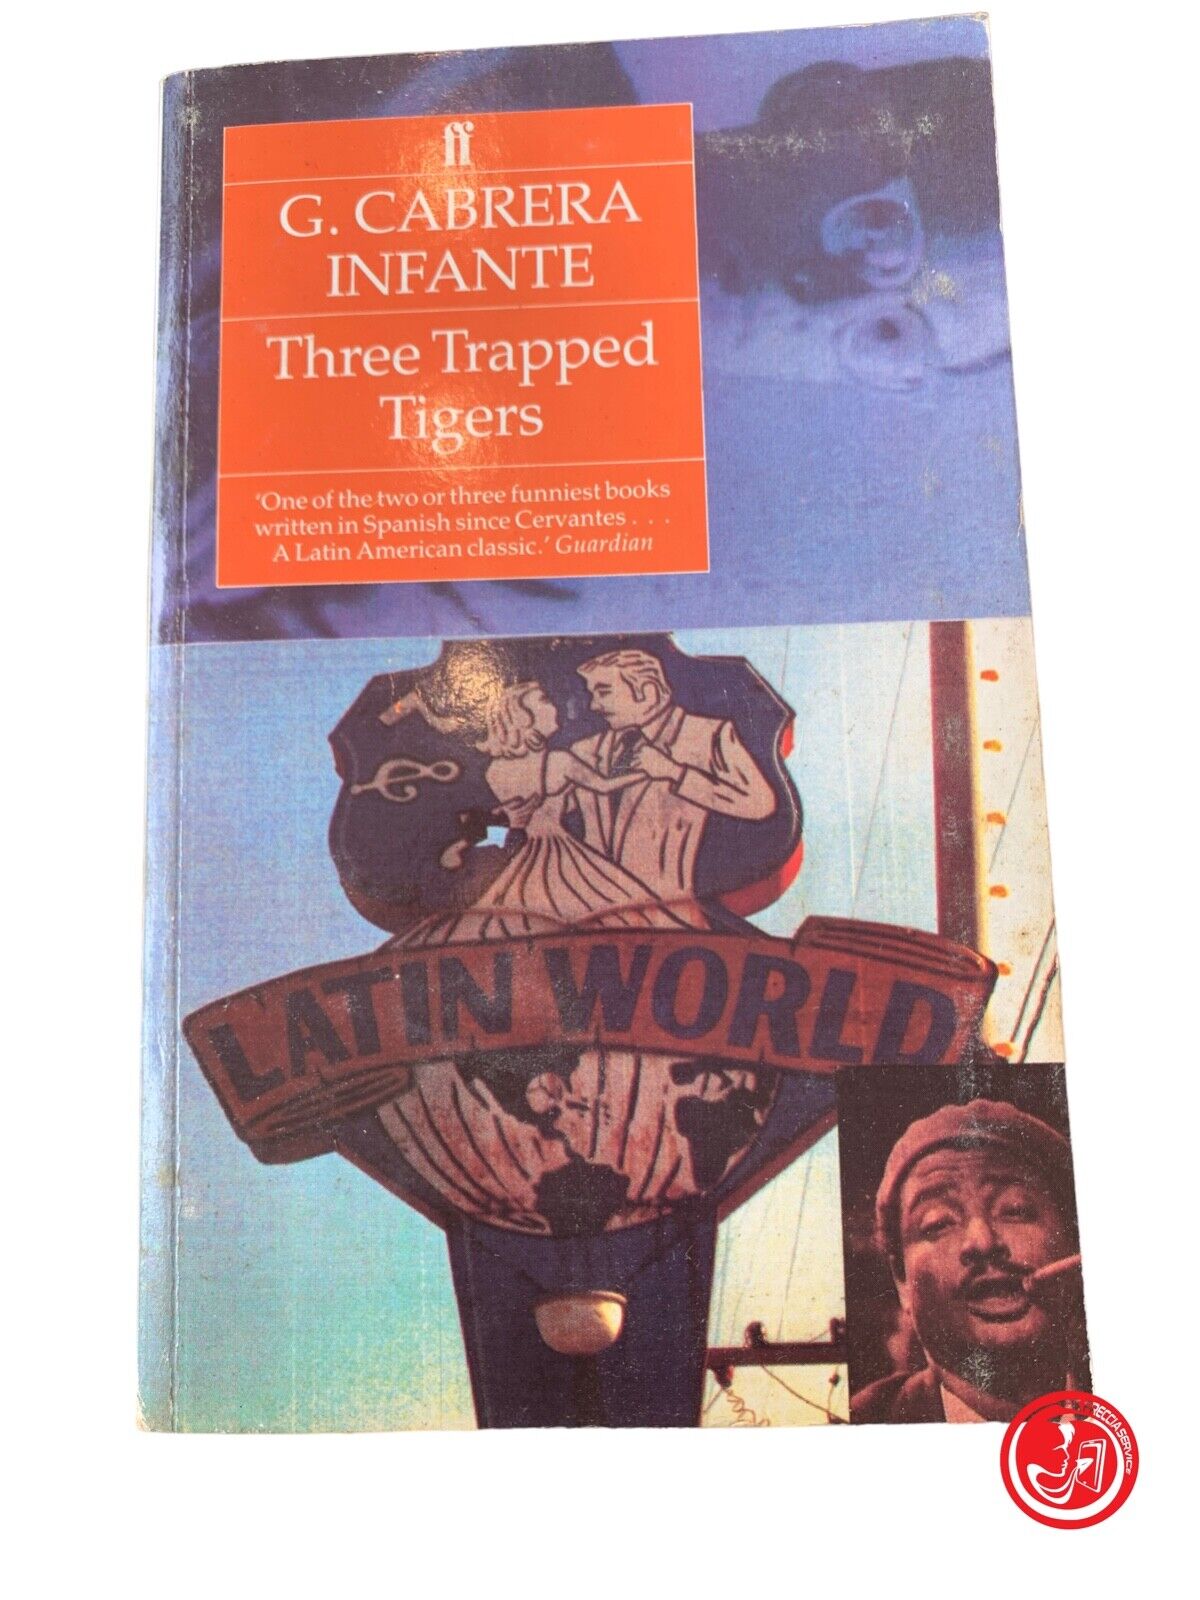 Three Trapped Tigers - G. Cabrera Infante - faber and faber 1990